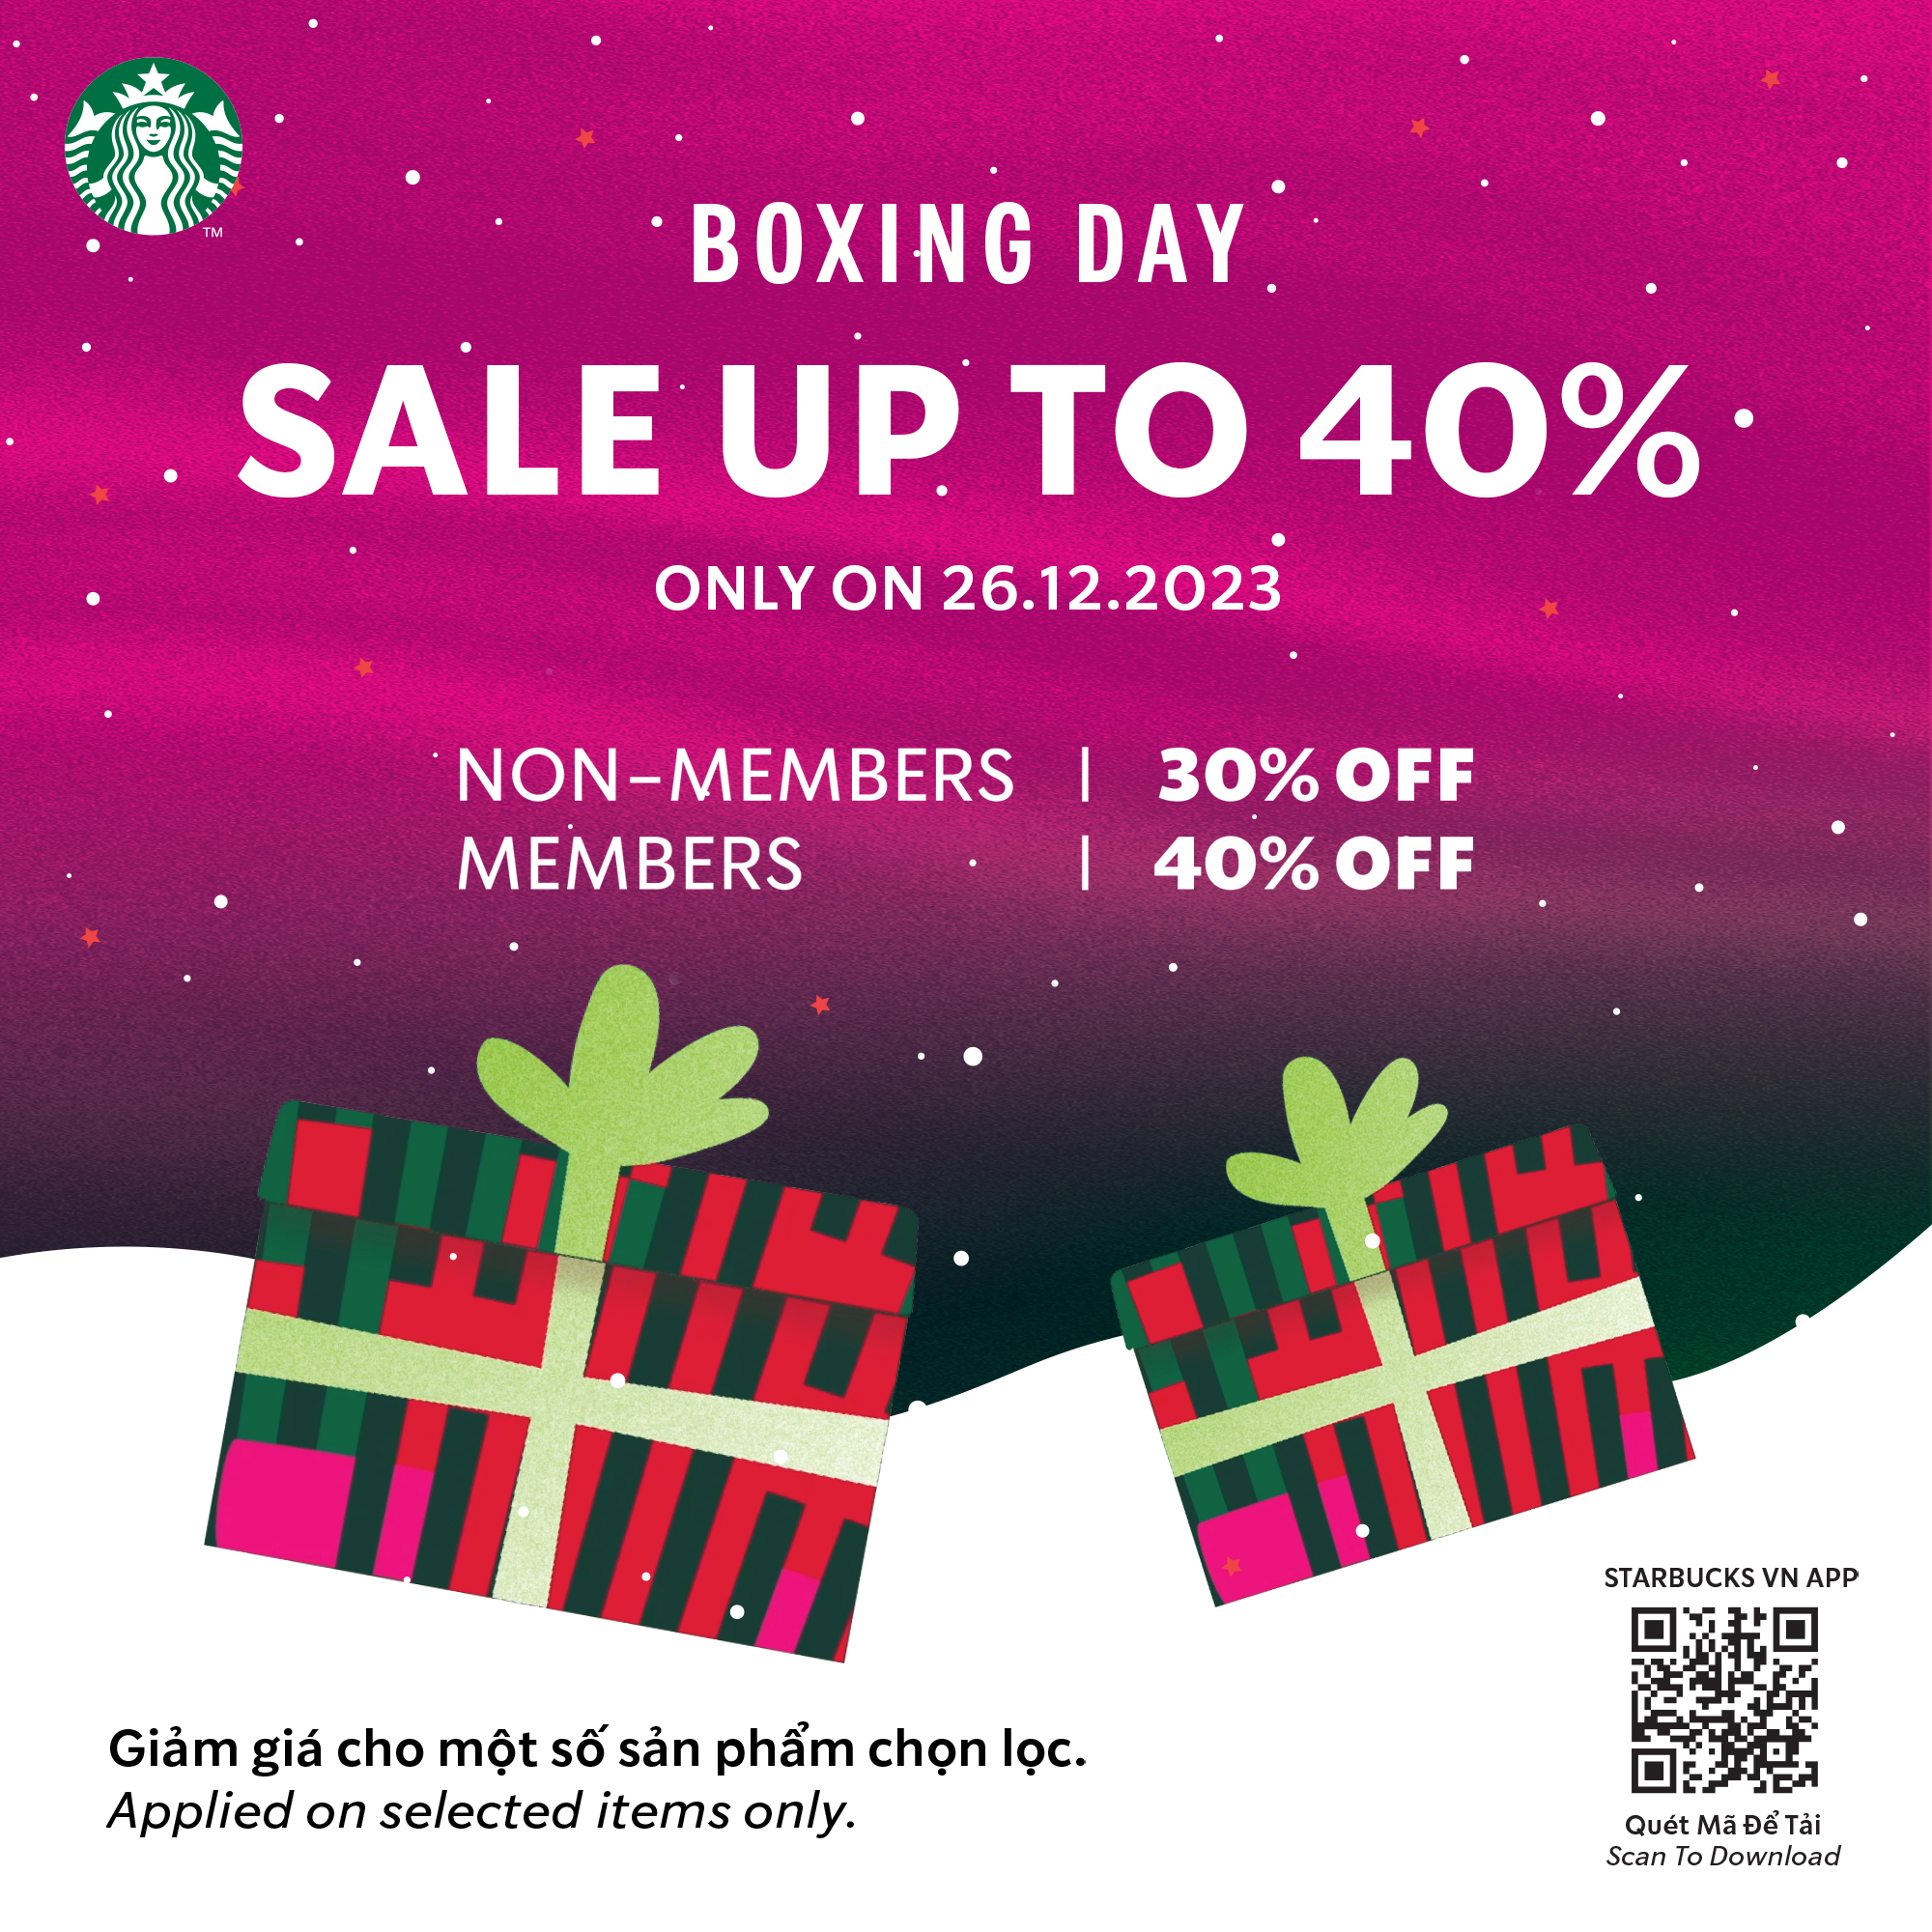 🎉BOXING DAY🎉SALE UP TOP 40%